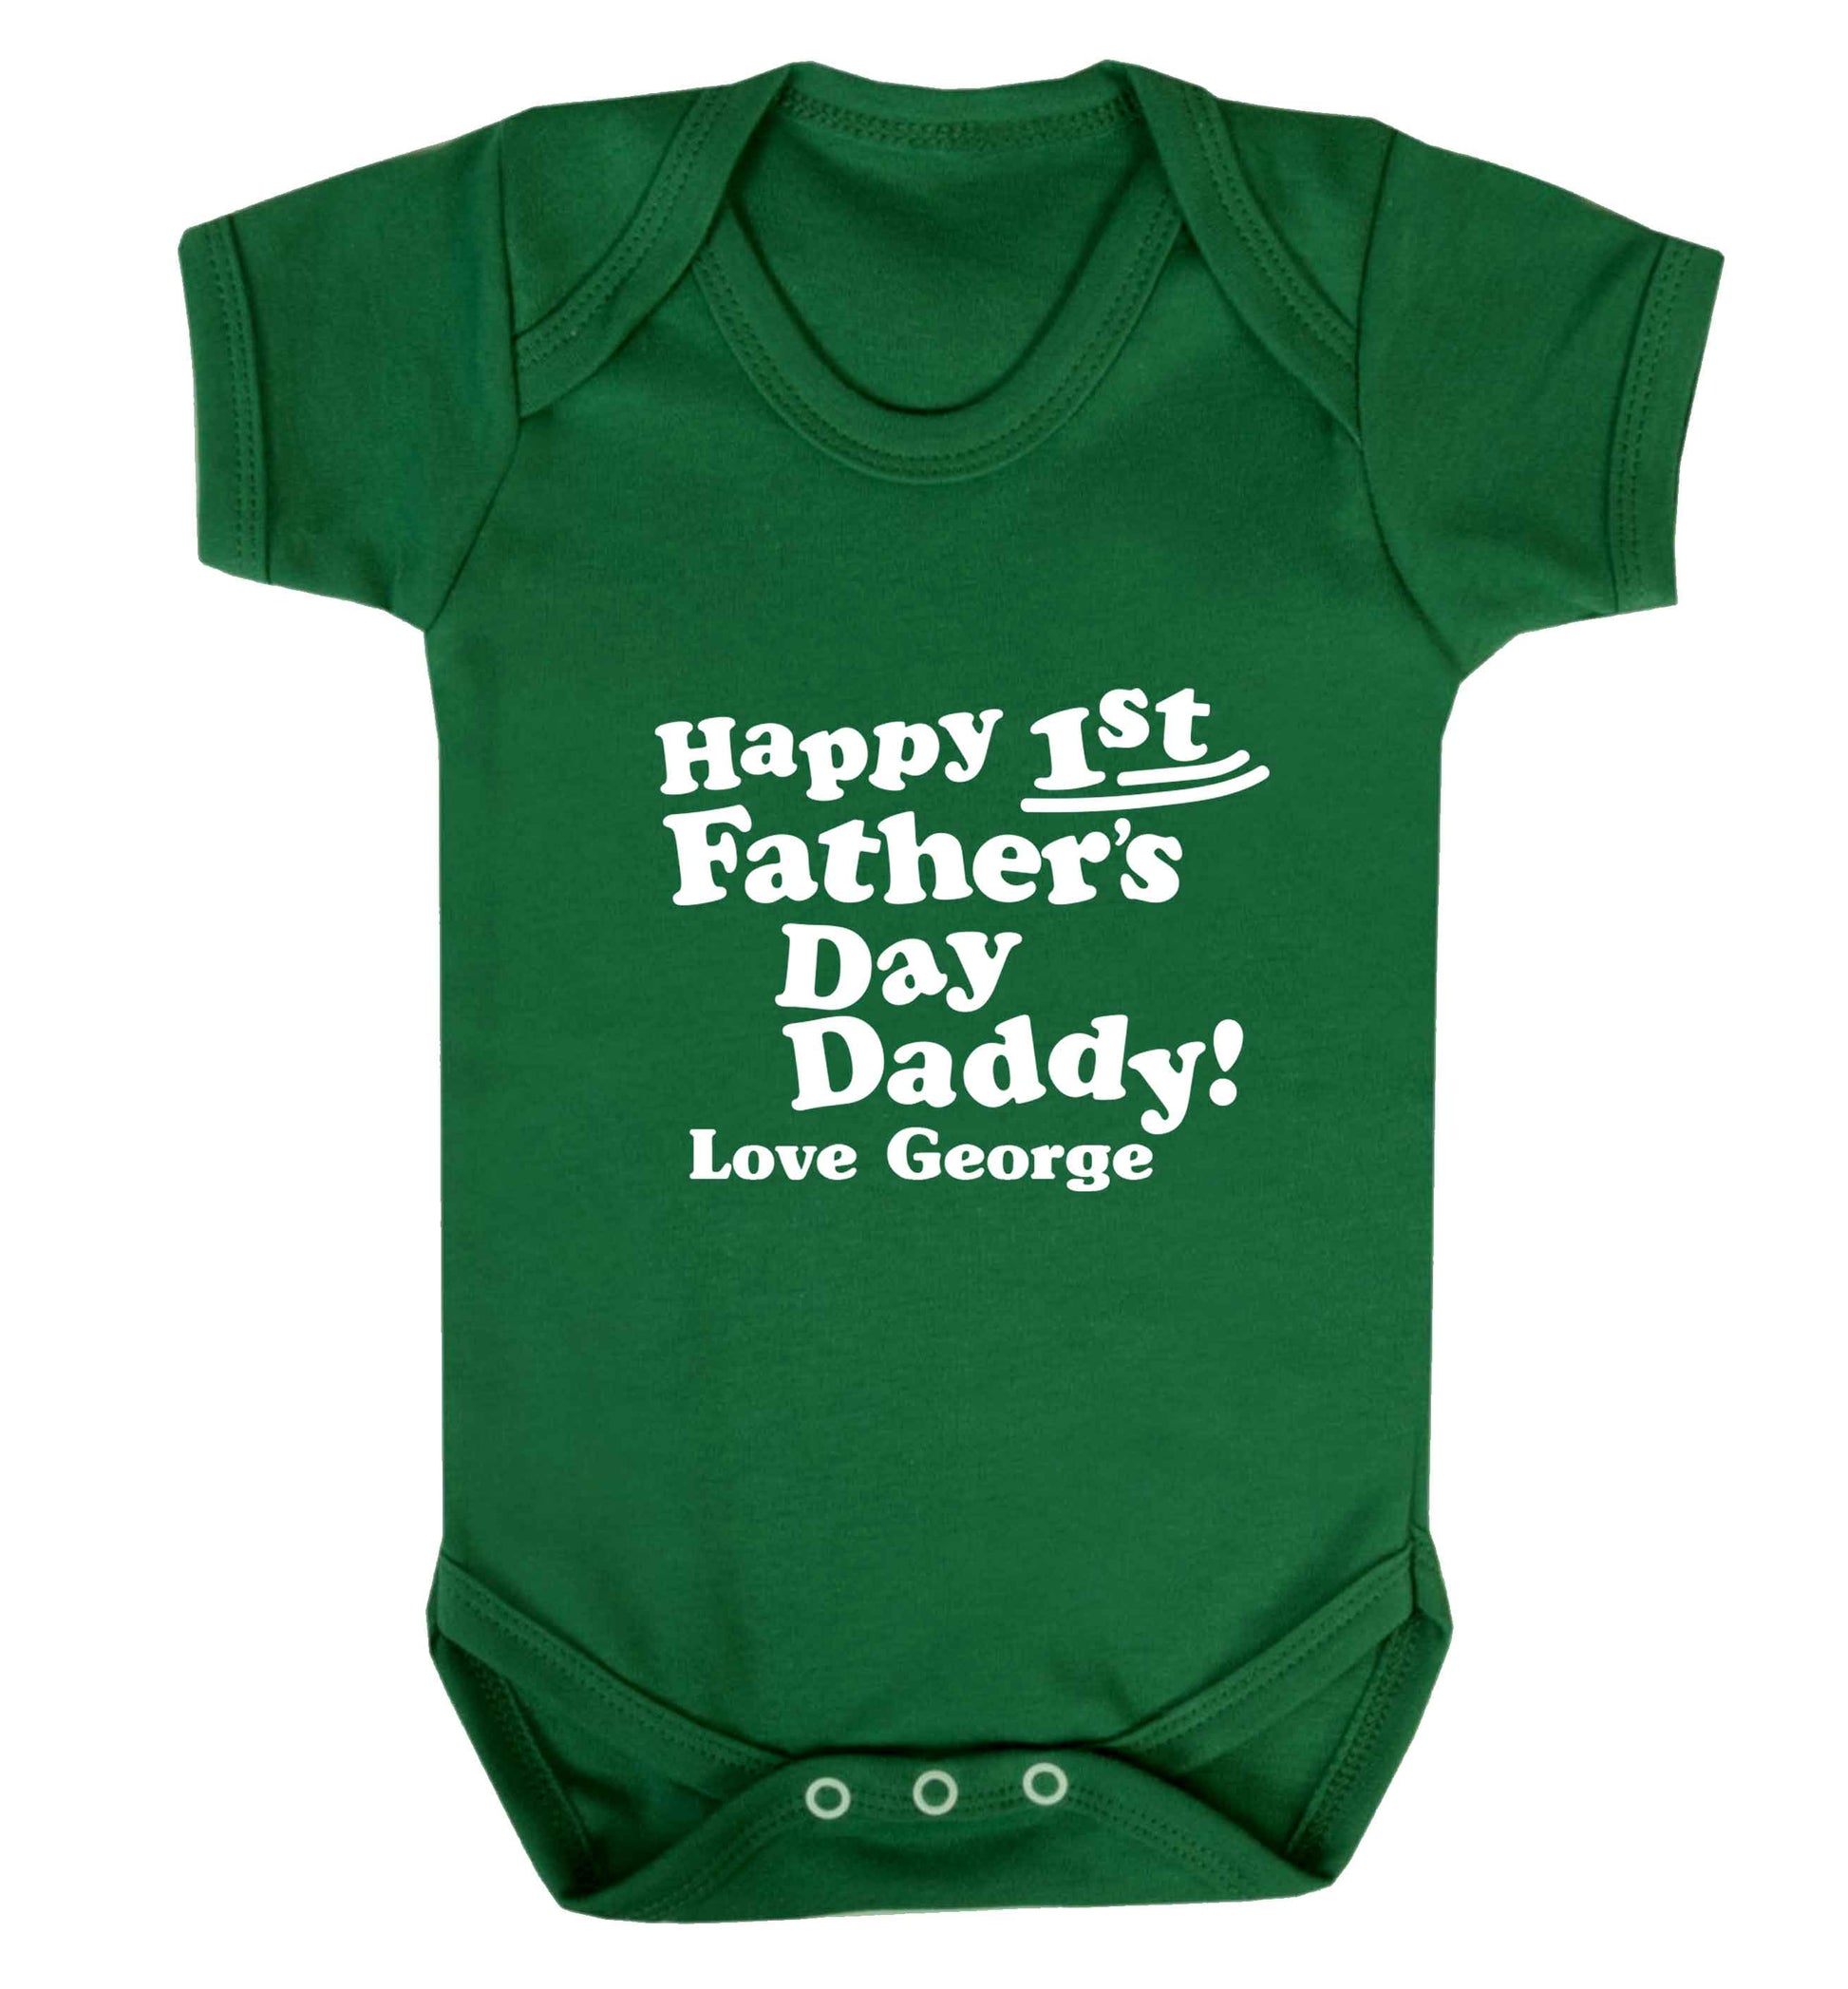 Happy first Fathers Day daddy love personalised baby vest green 18-24 months